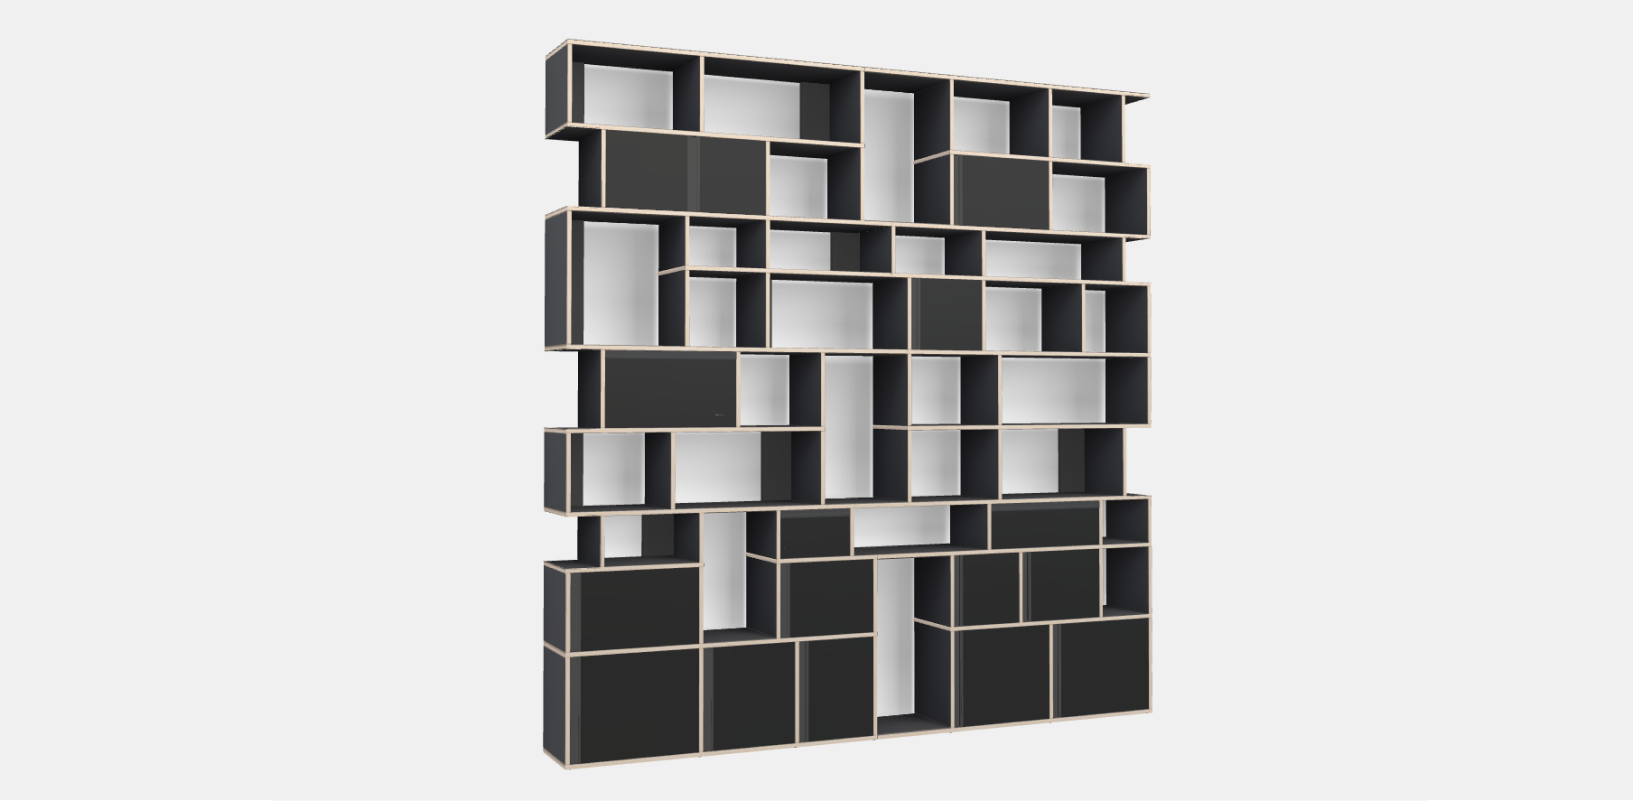 Wallstorage in Black with Doors and Drawers